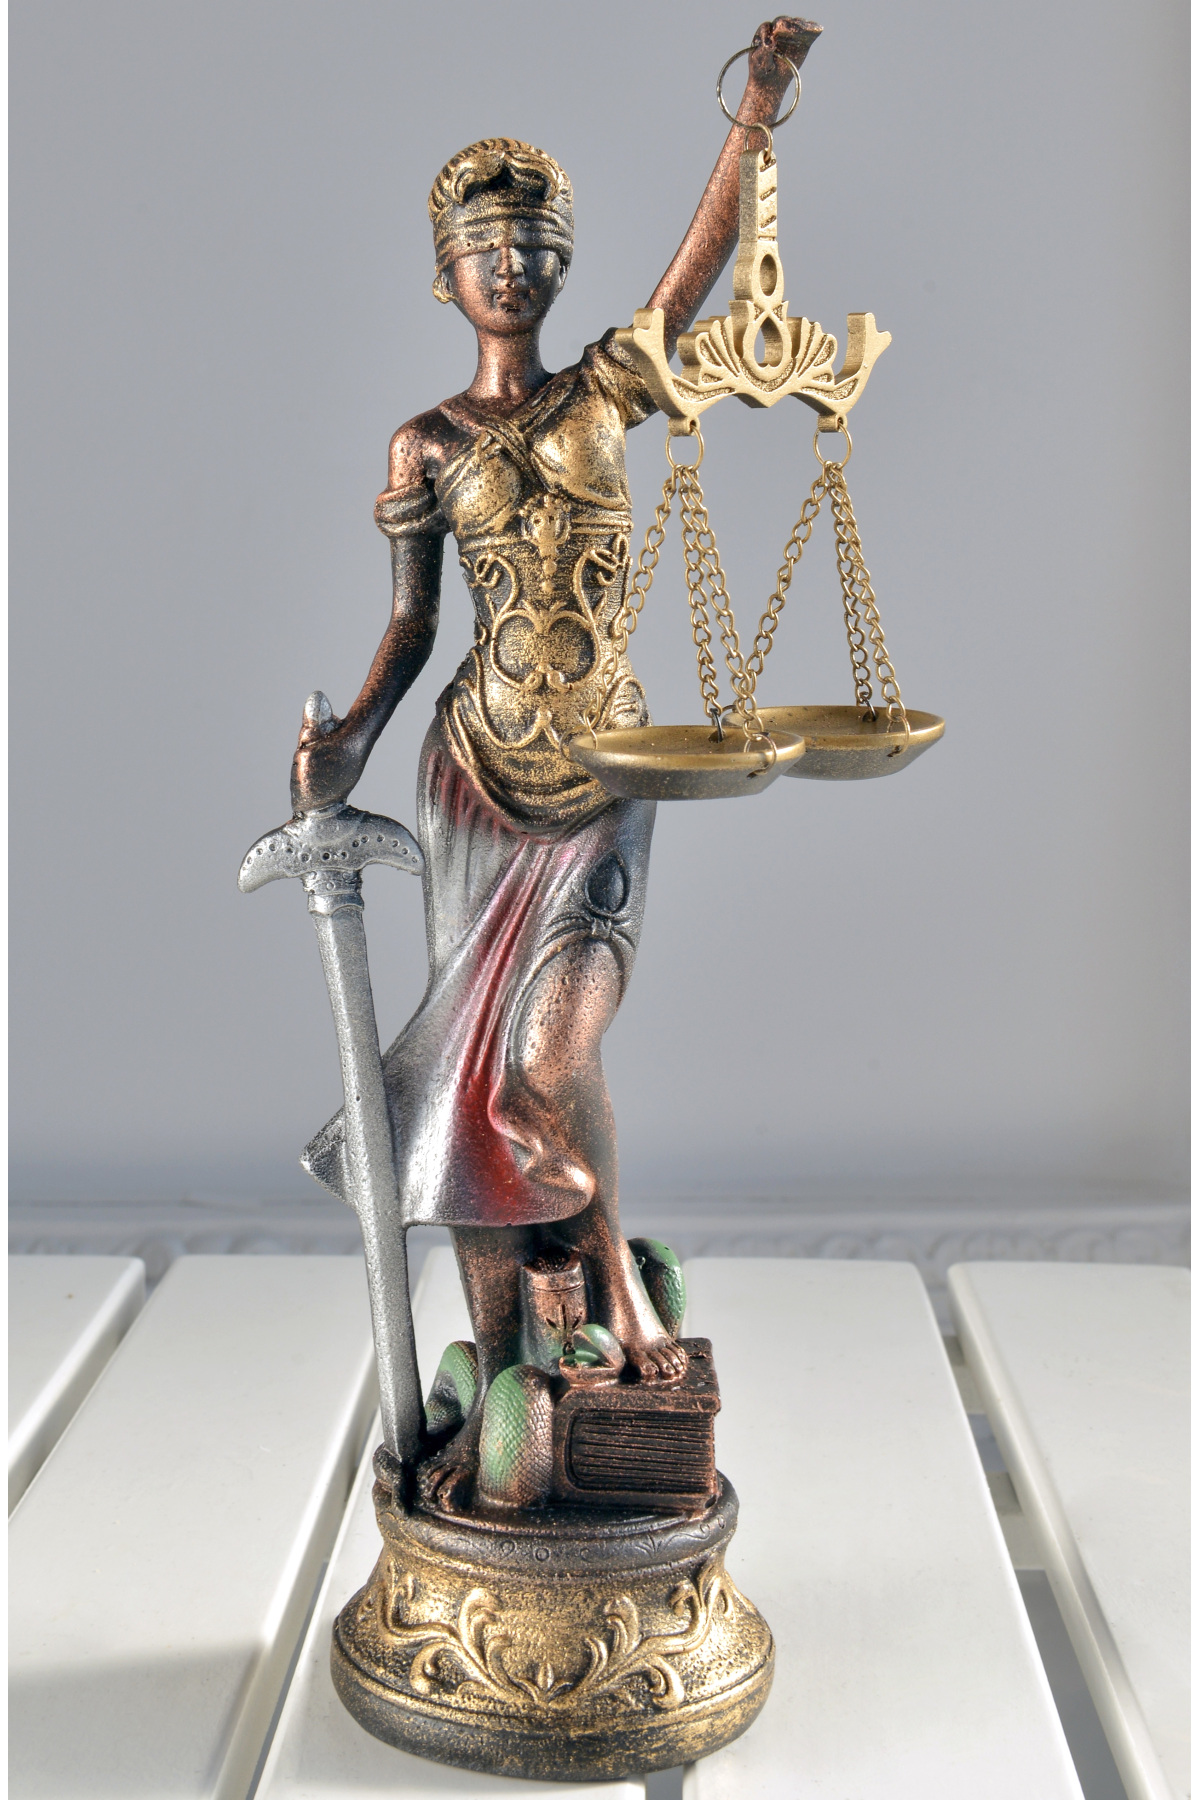 Real Quality Large Statue of Justice 44 cm (Themis) scales figurine